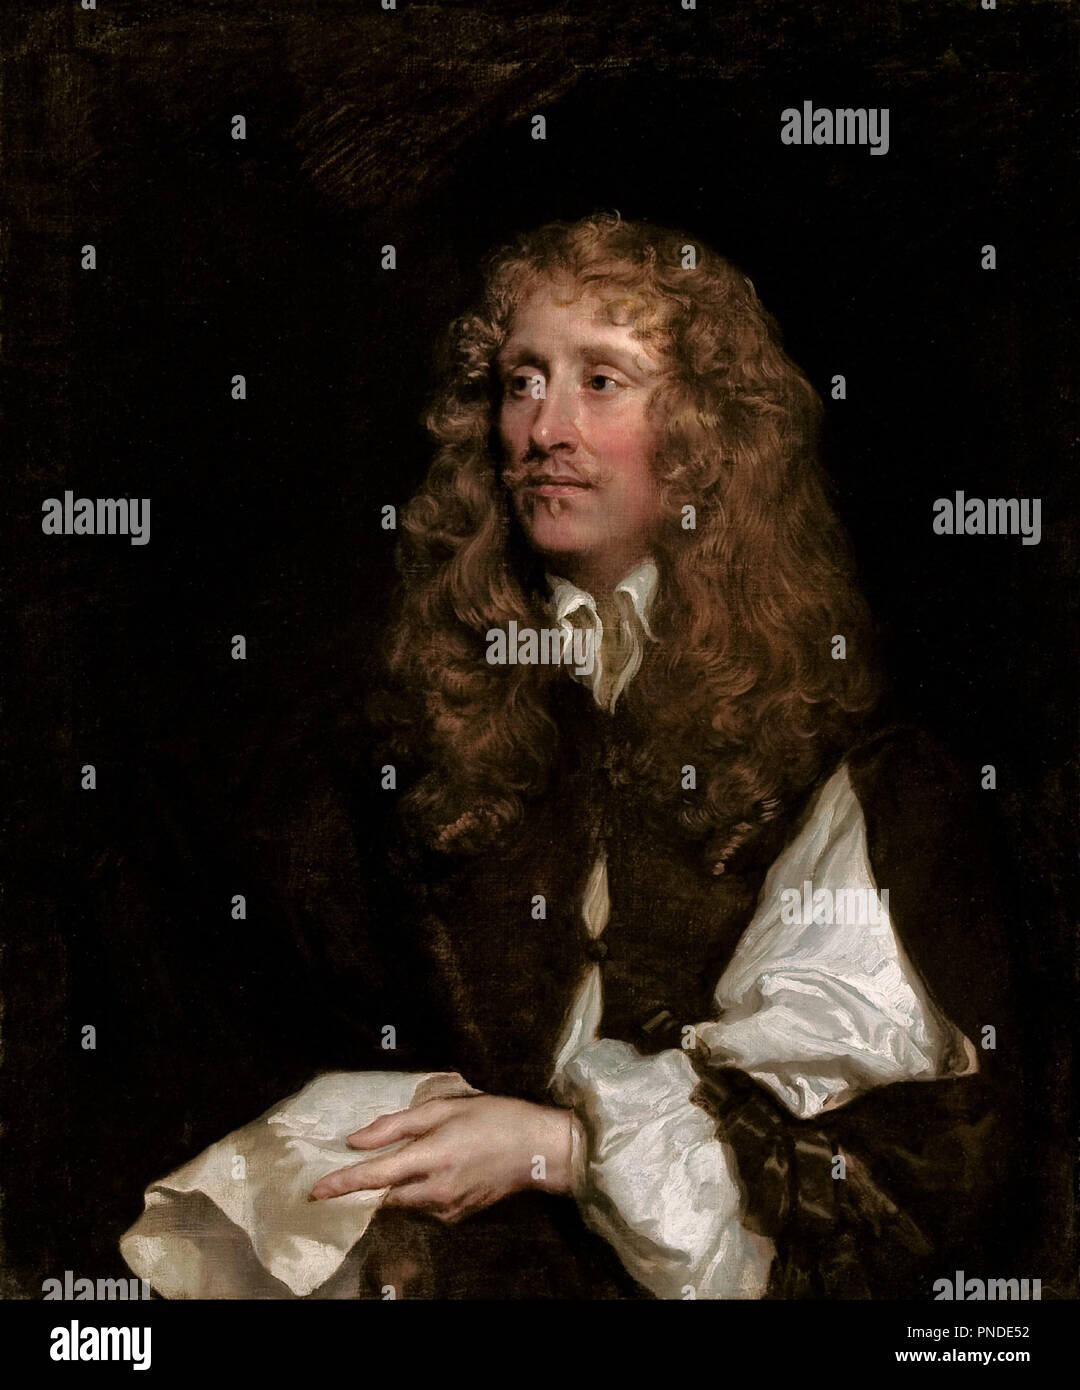 Portrait of a man, thought to be George Booth, Lord Delamere. Date/Period: Ca. 1660. Painting. Oil on canvas. Height: 91.20 mm (3.59 in); Width: 76.20 mm (3 in). Author: Peter Lely. Stock Photo